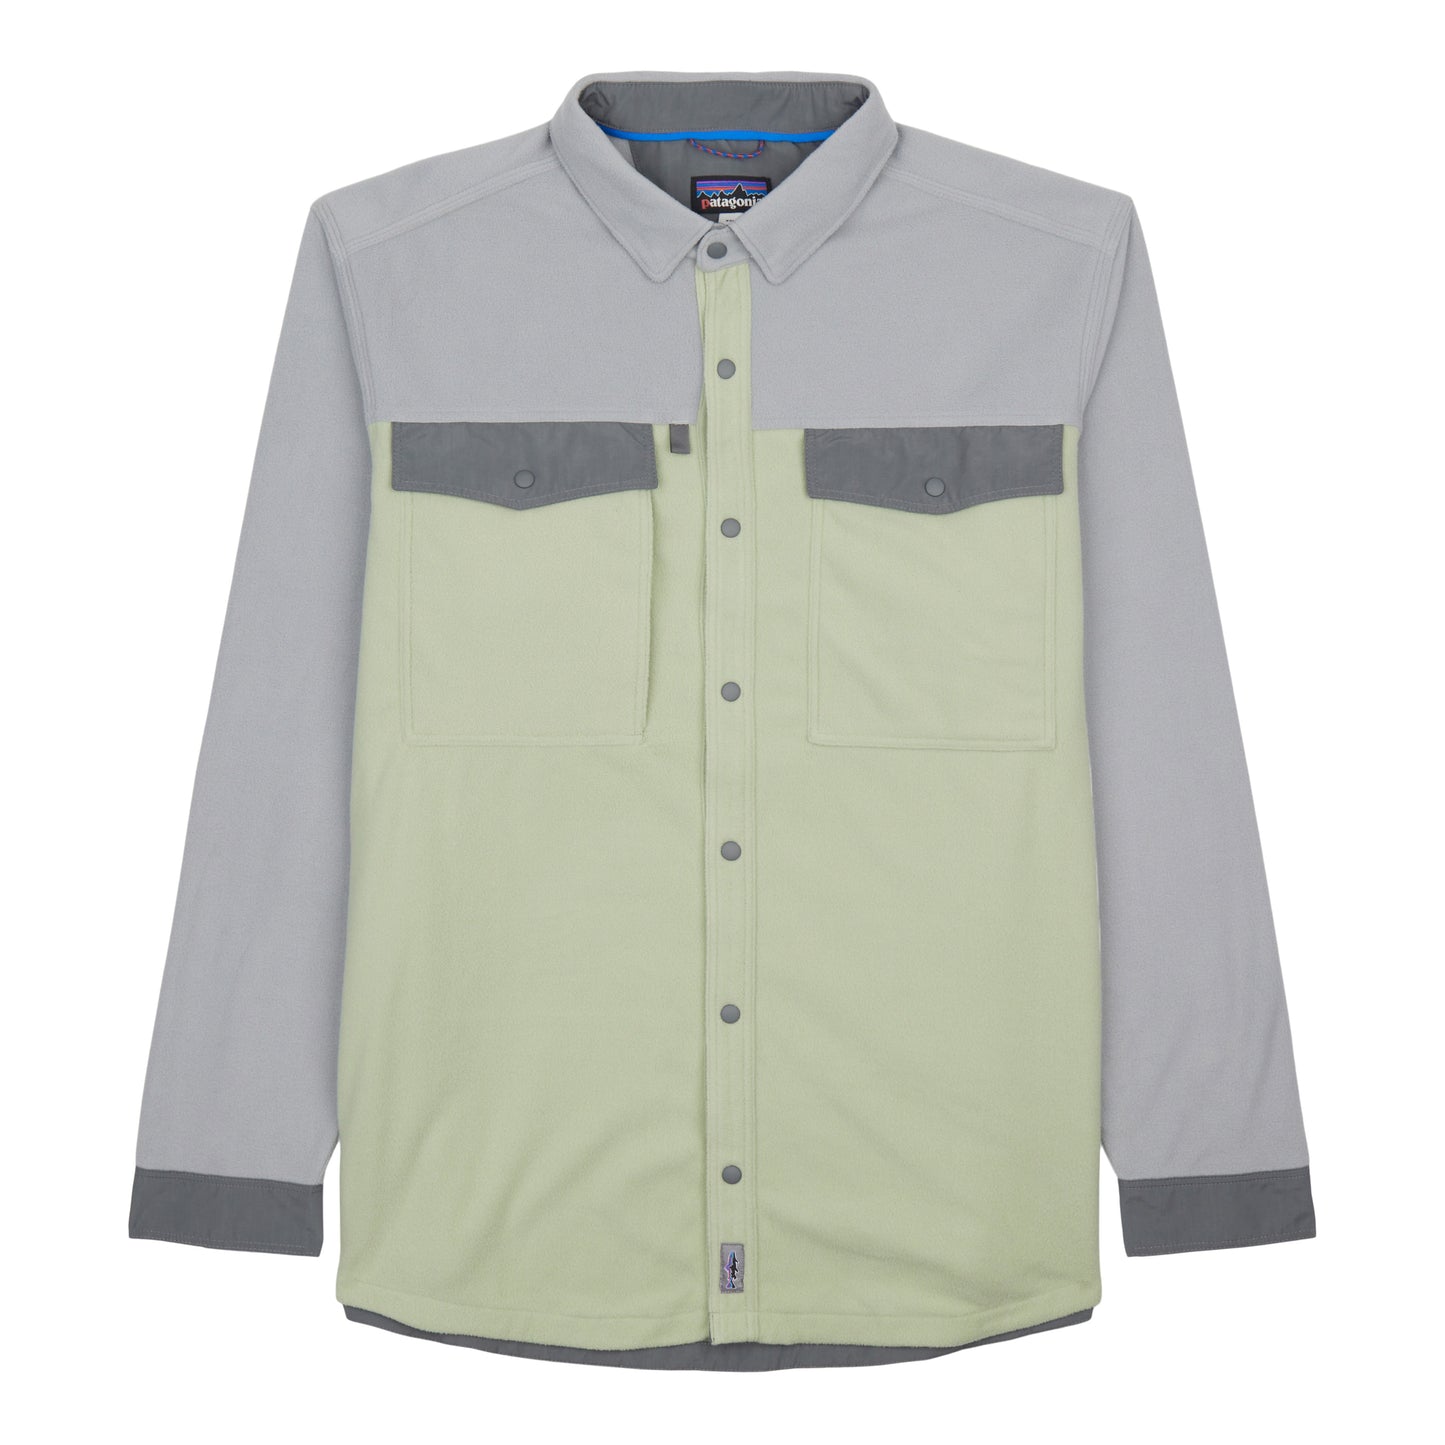 Men's Long-Sleeved Early Rise Snap Shirt